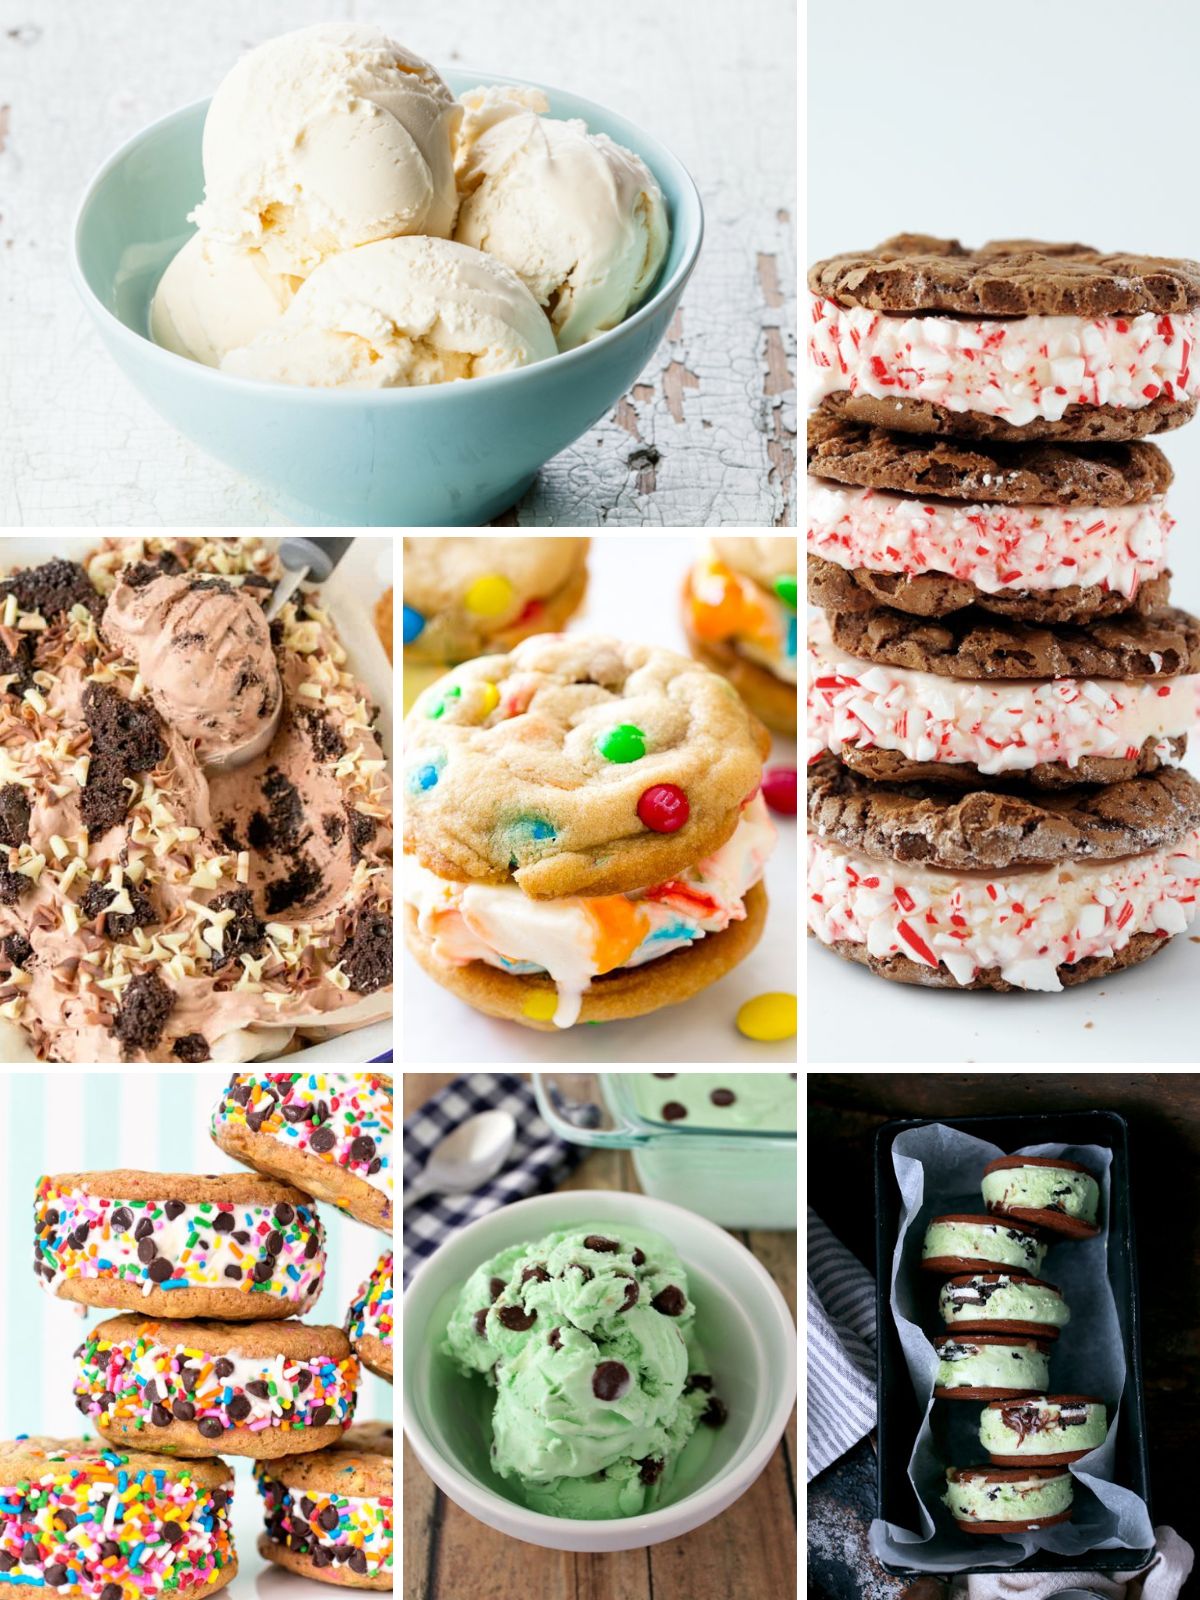 A collection of homemade ice cream recipes including sandwiches.